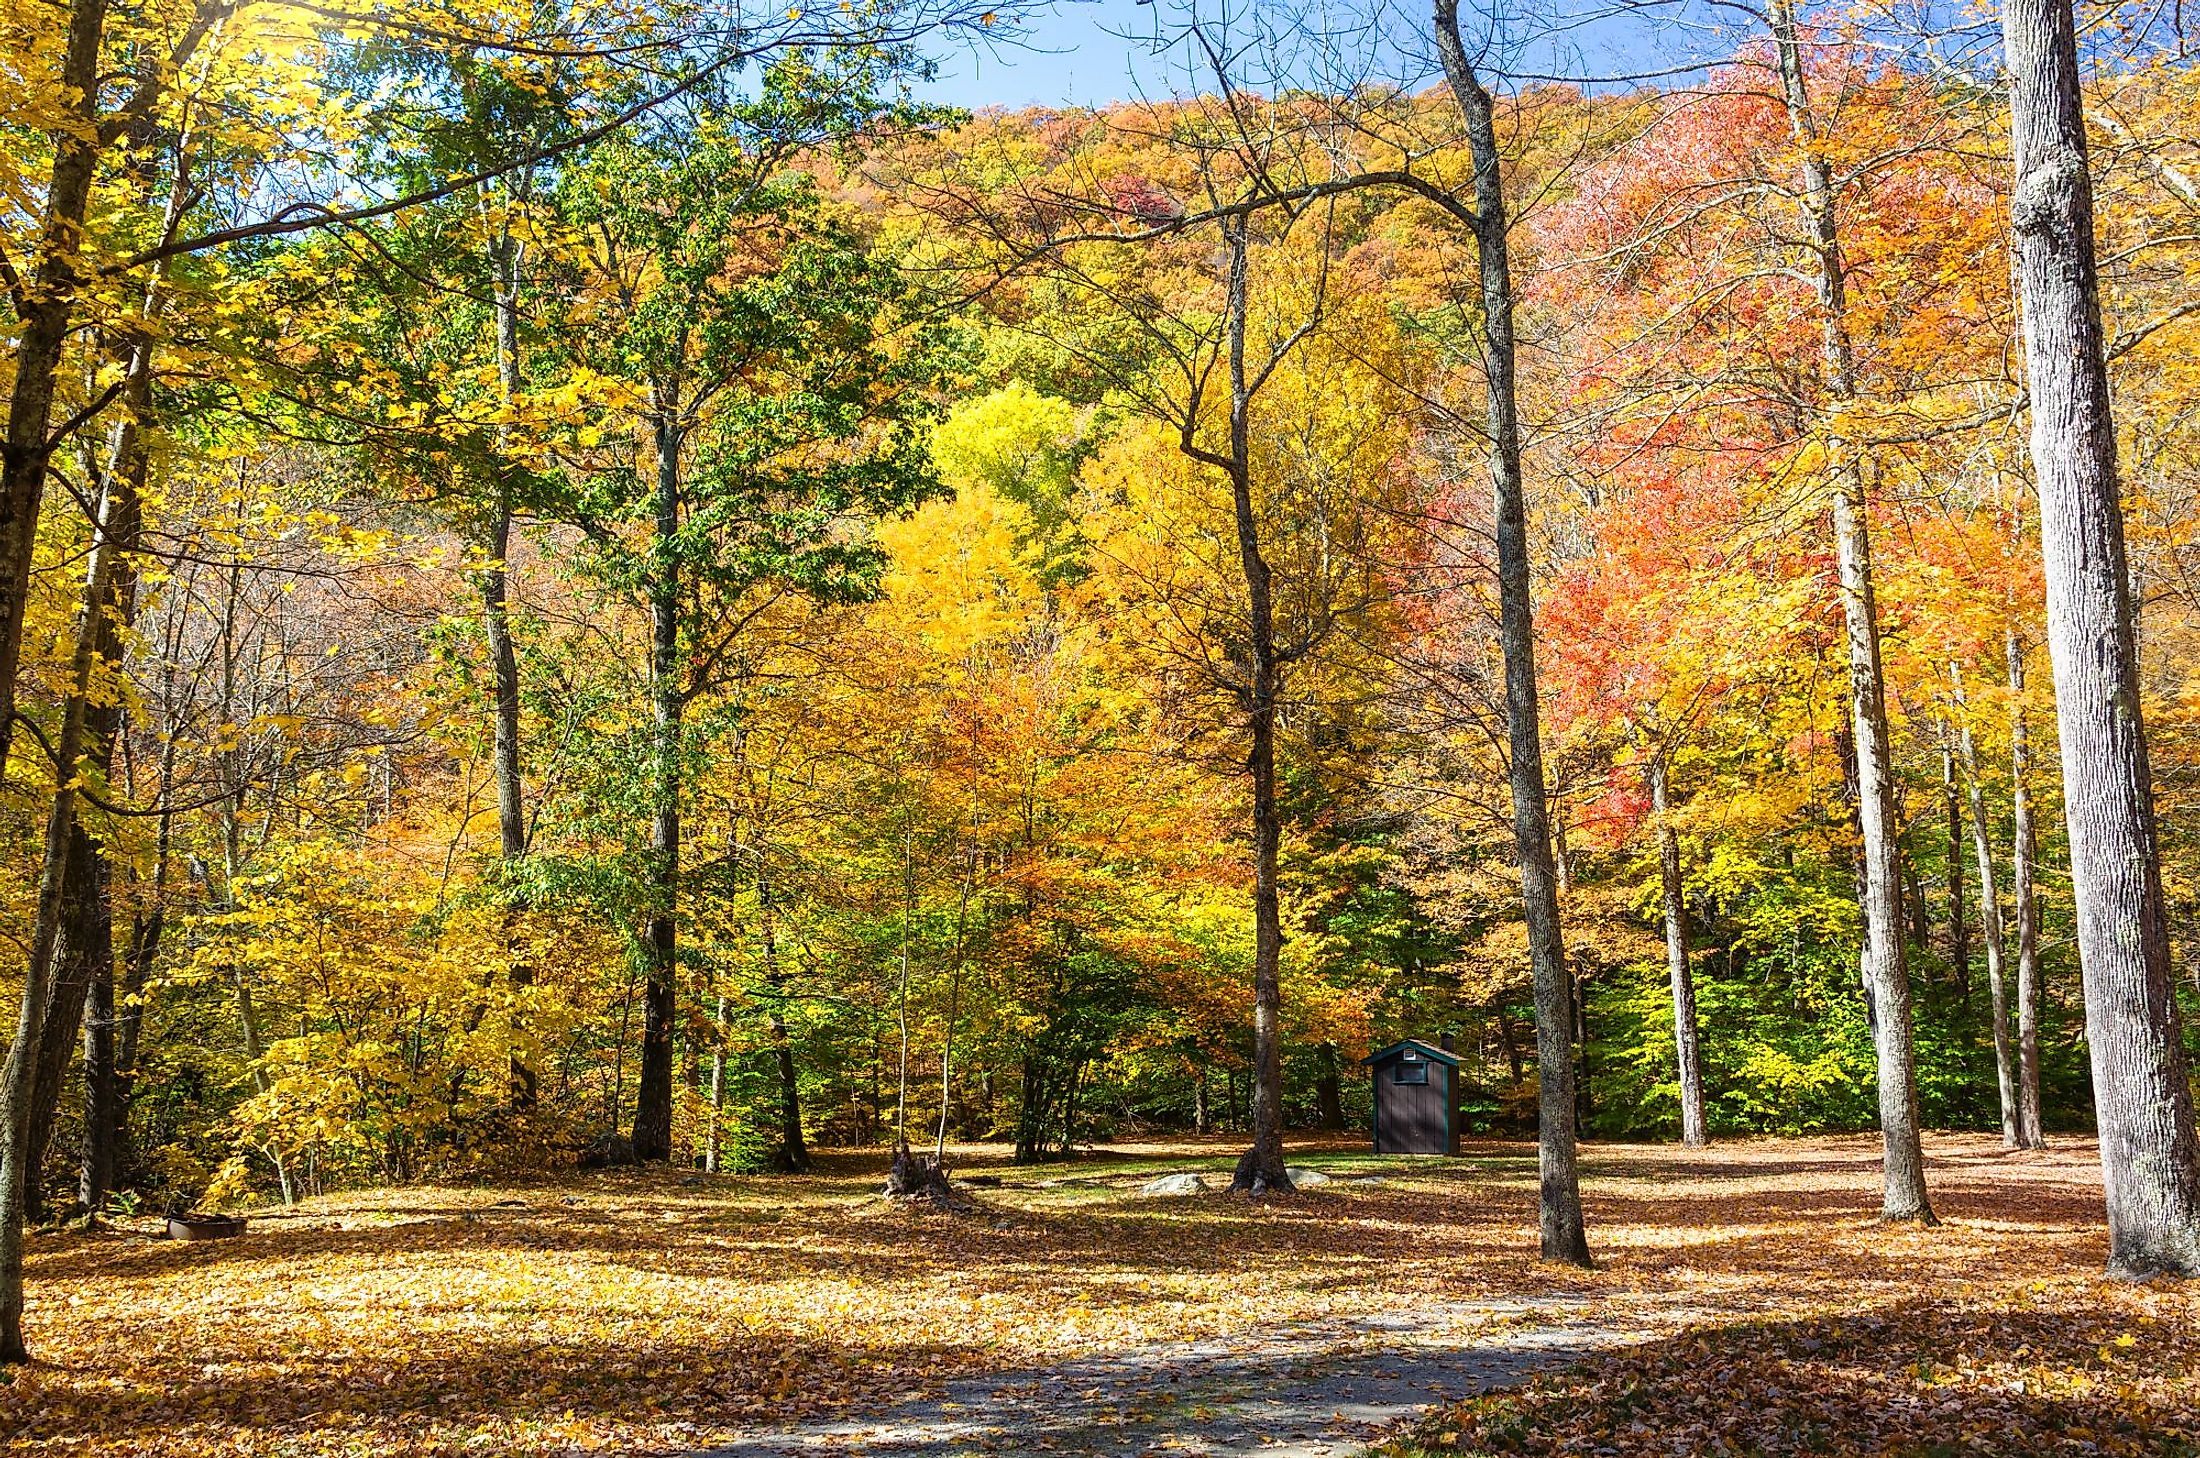 Recreation Area in forest with colorful wooded hills in the background on a sunny autumn day in Kent, Connecticut